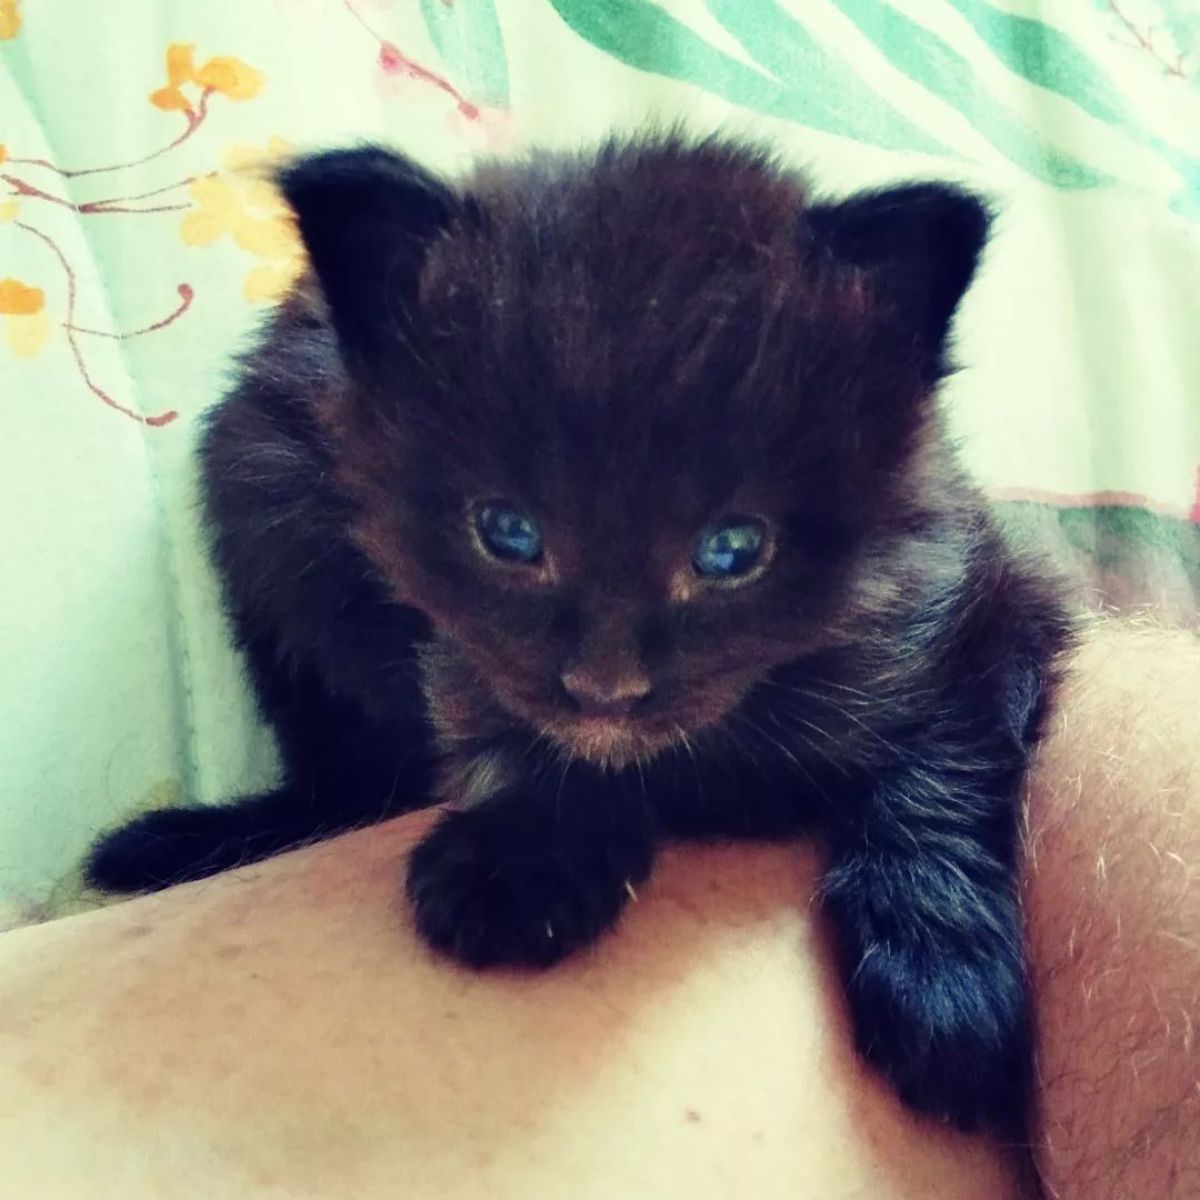 An adorable black maine coon kitten with blue eyes lying on a human arm.